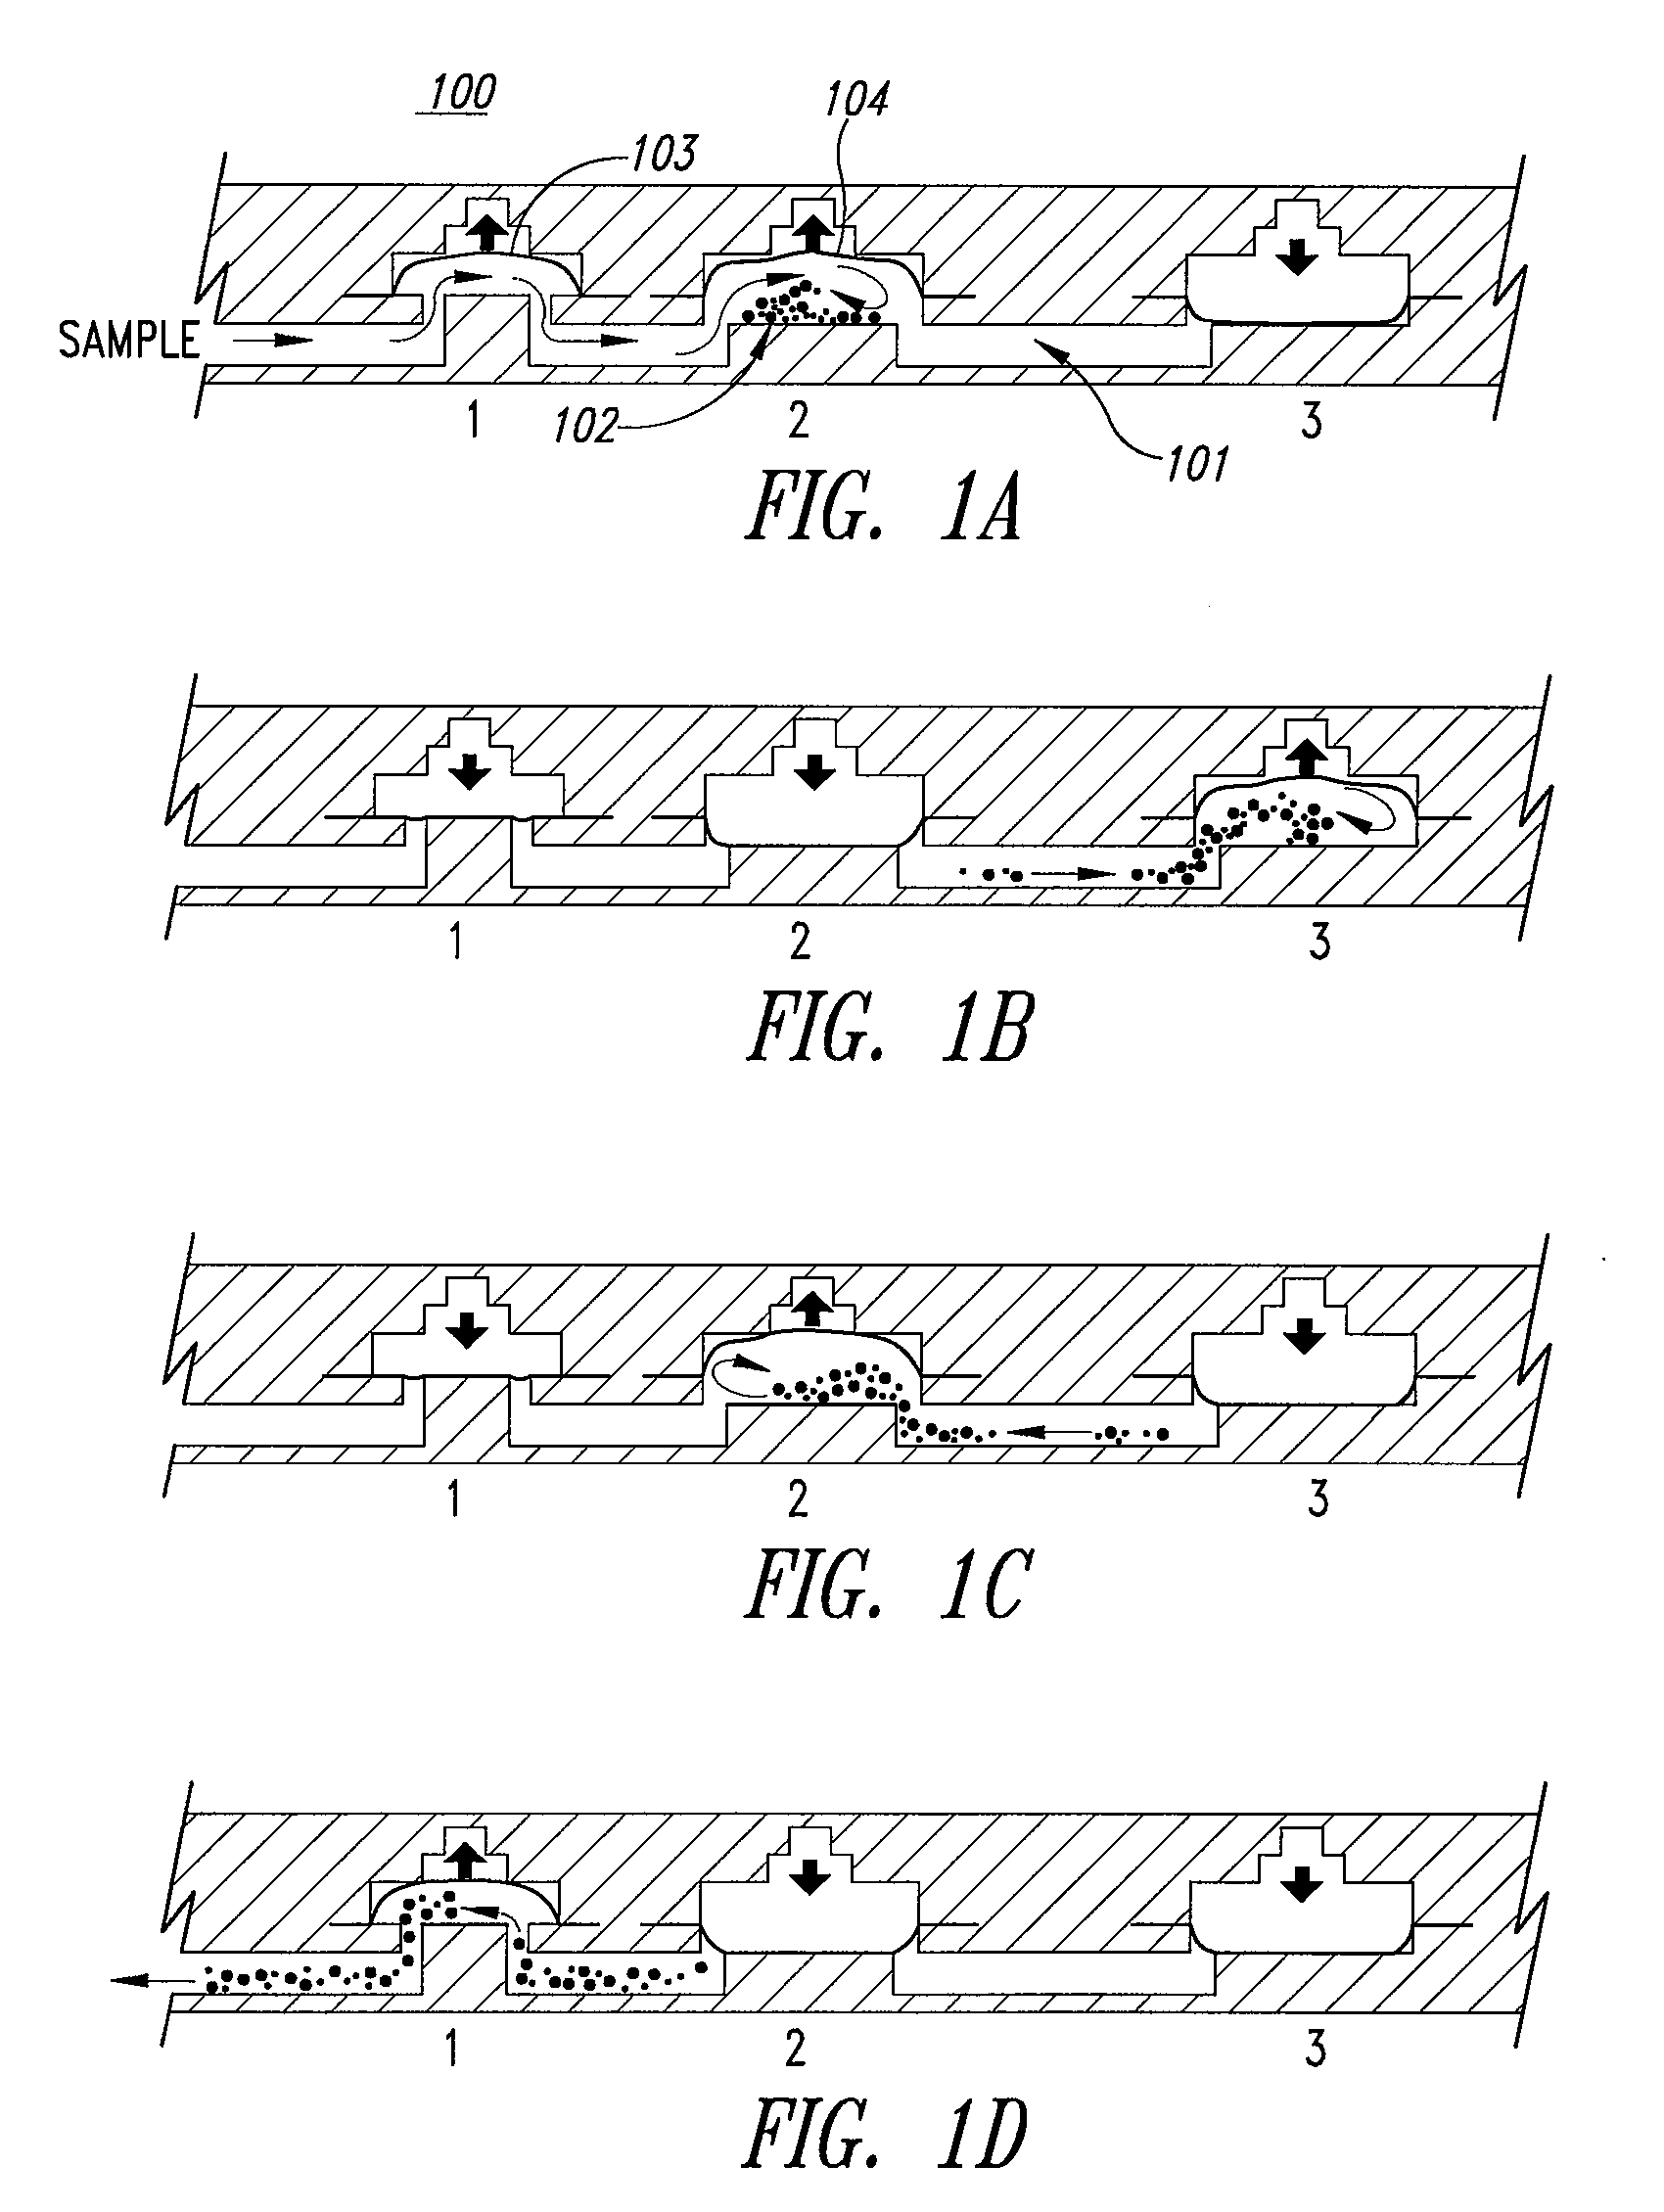 Microfluidic mixing and analytical apparatus